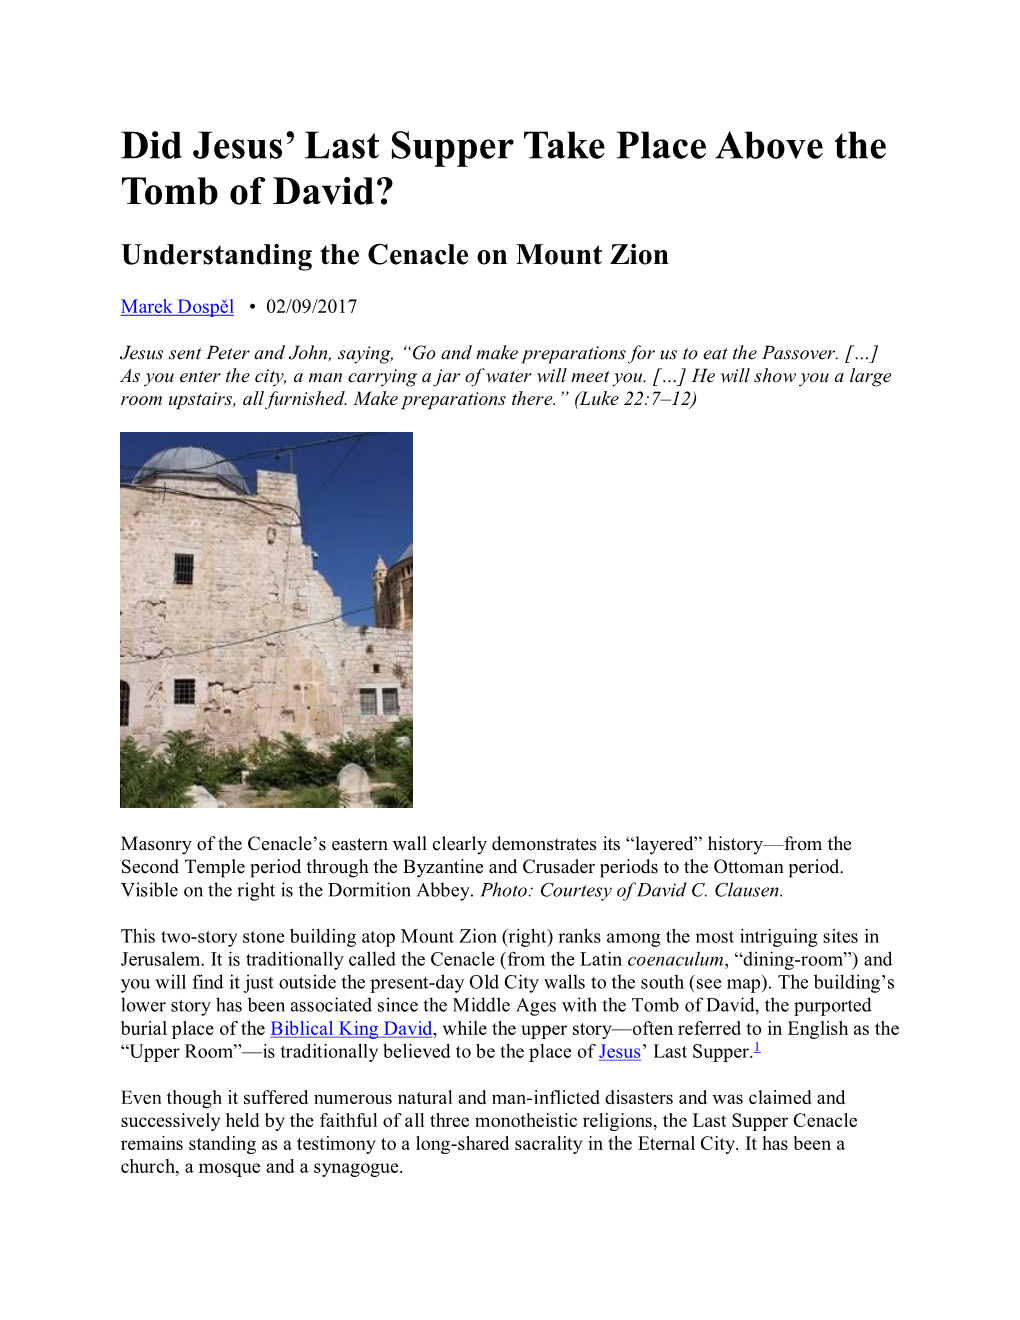 Did Jesus' Last Supper Take Place Above the Tomb of David?